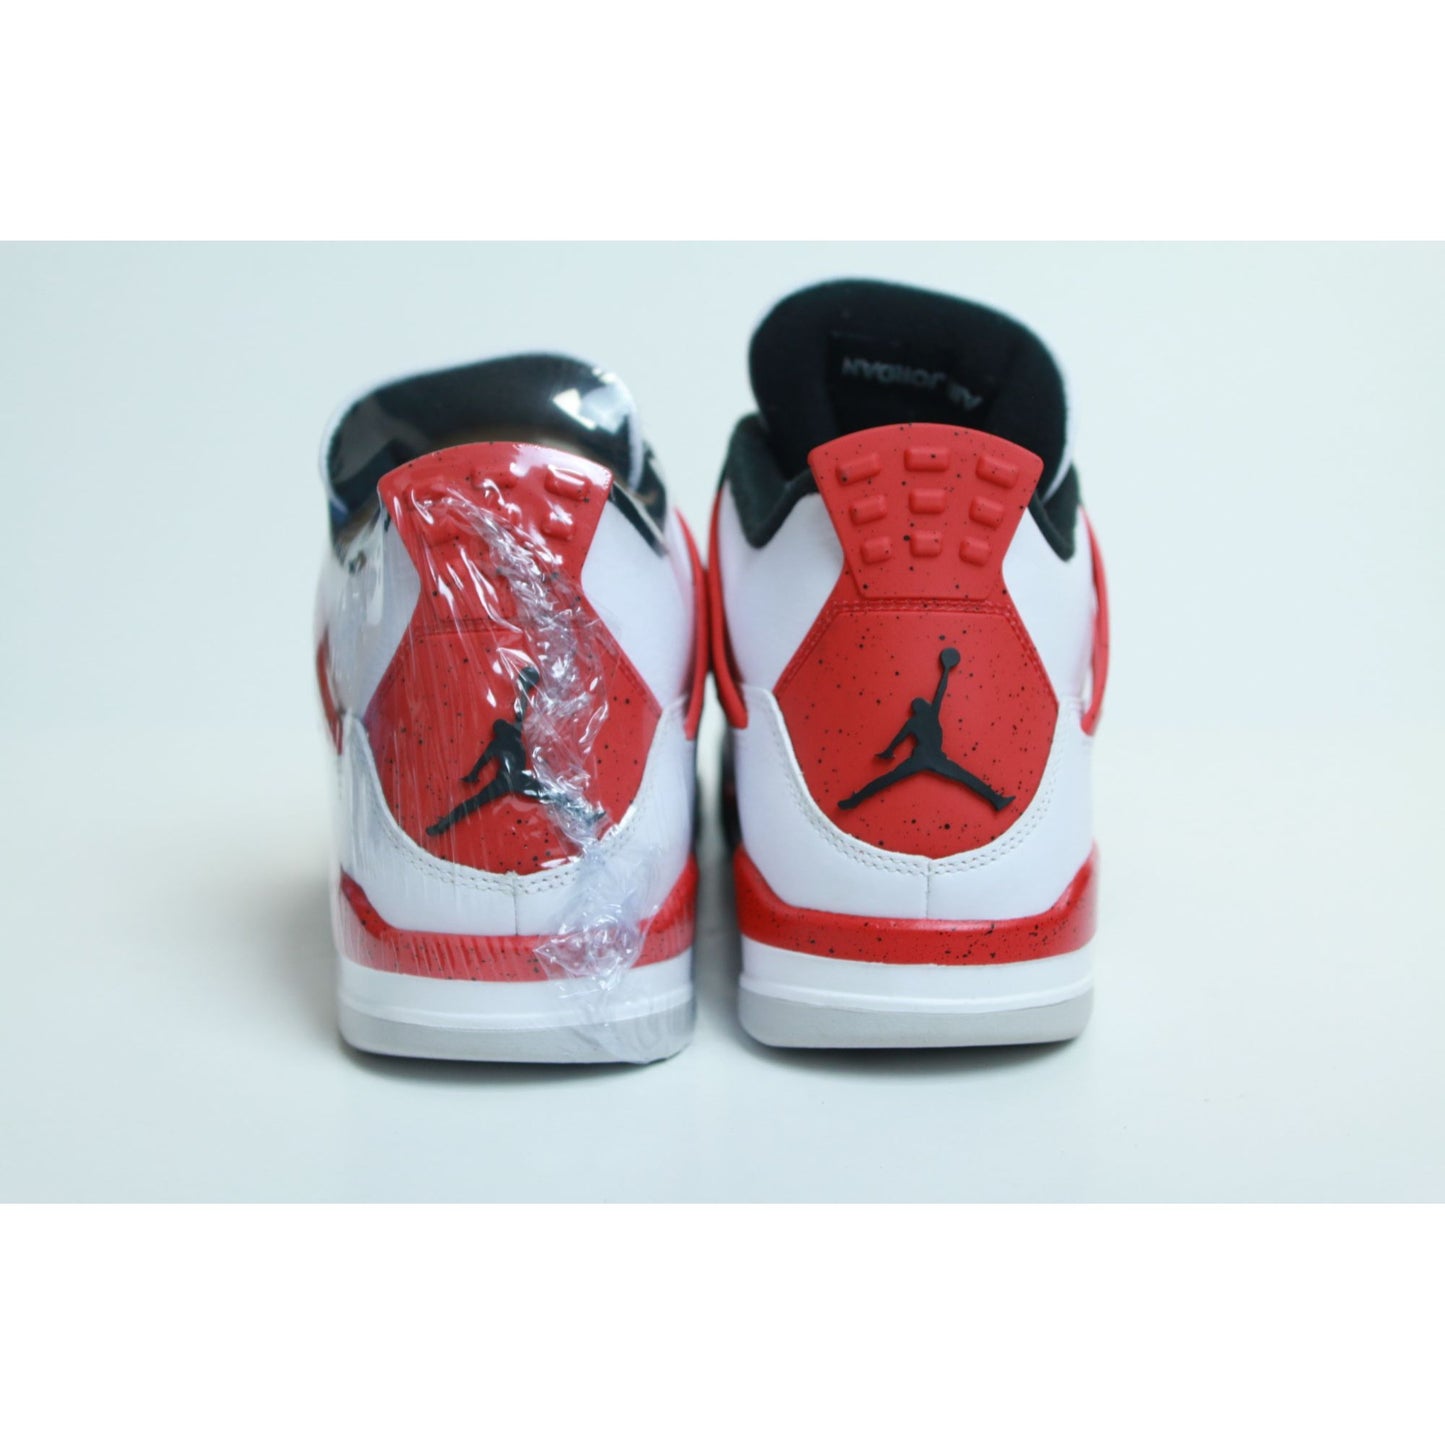 AJ4 RED CEMENT USED SIZE 11.5M